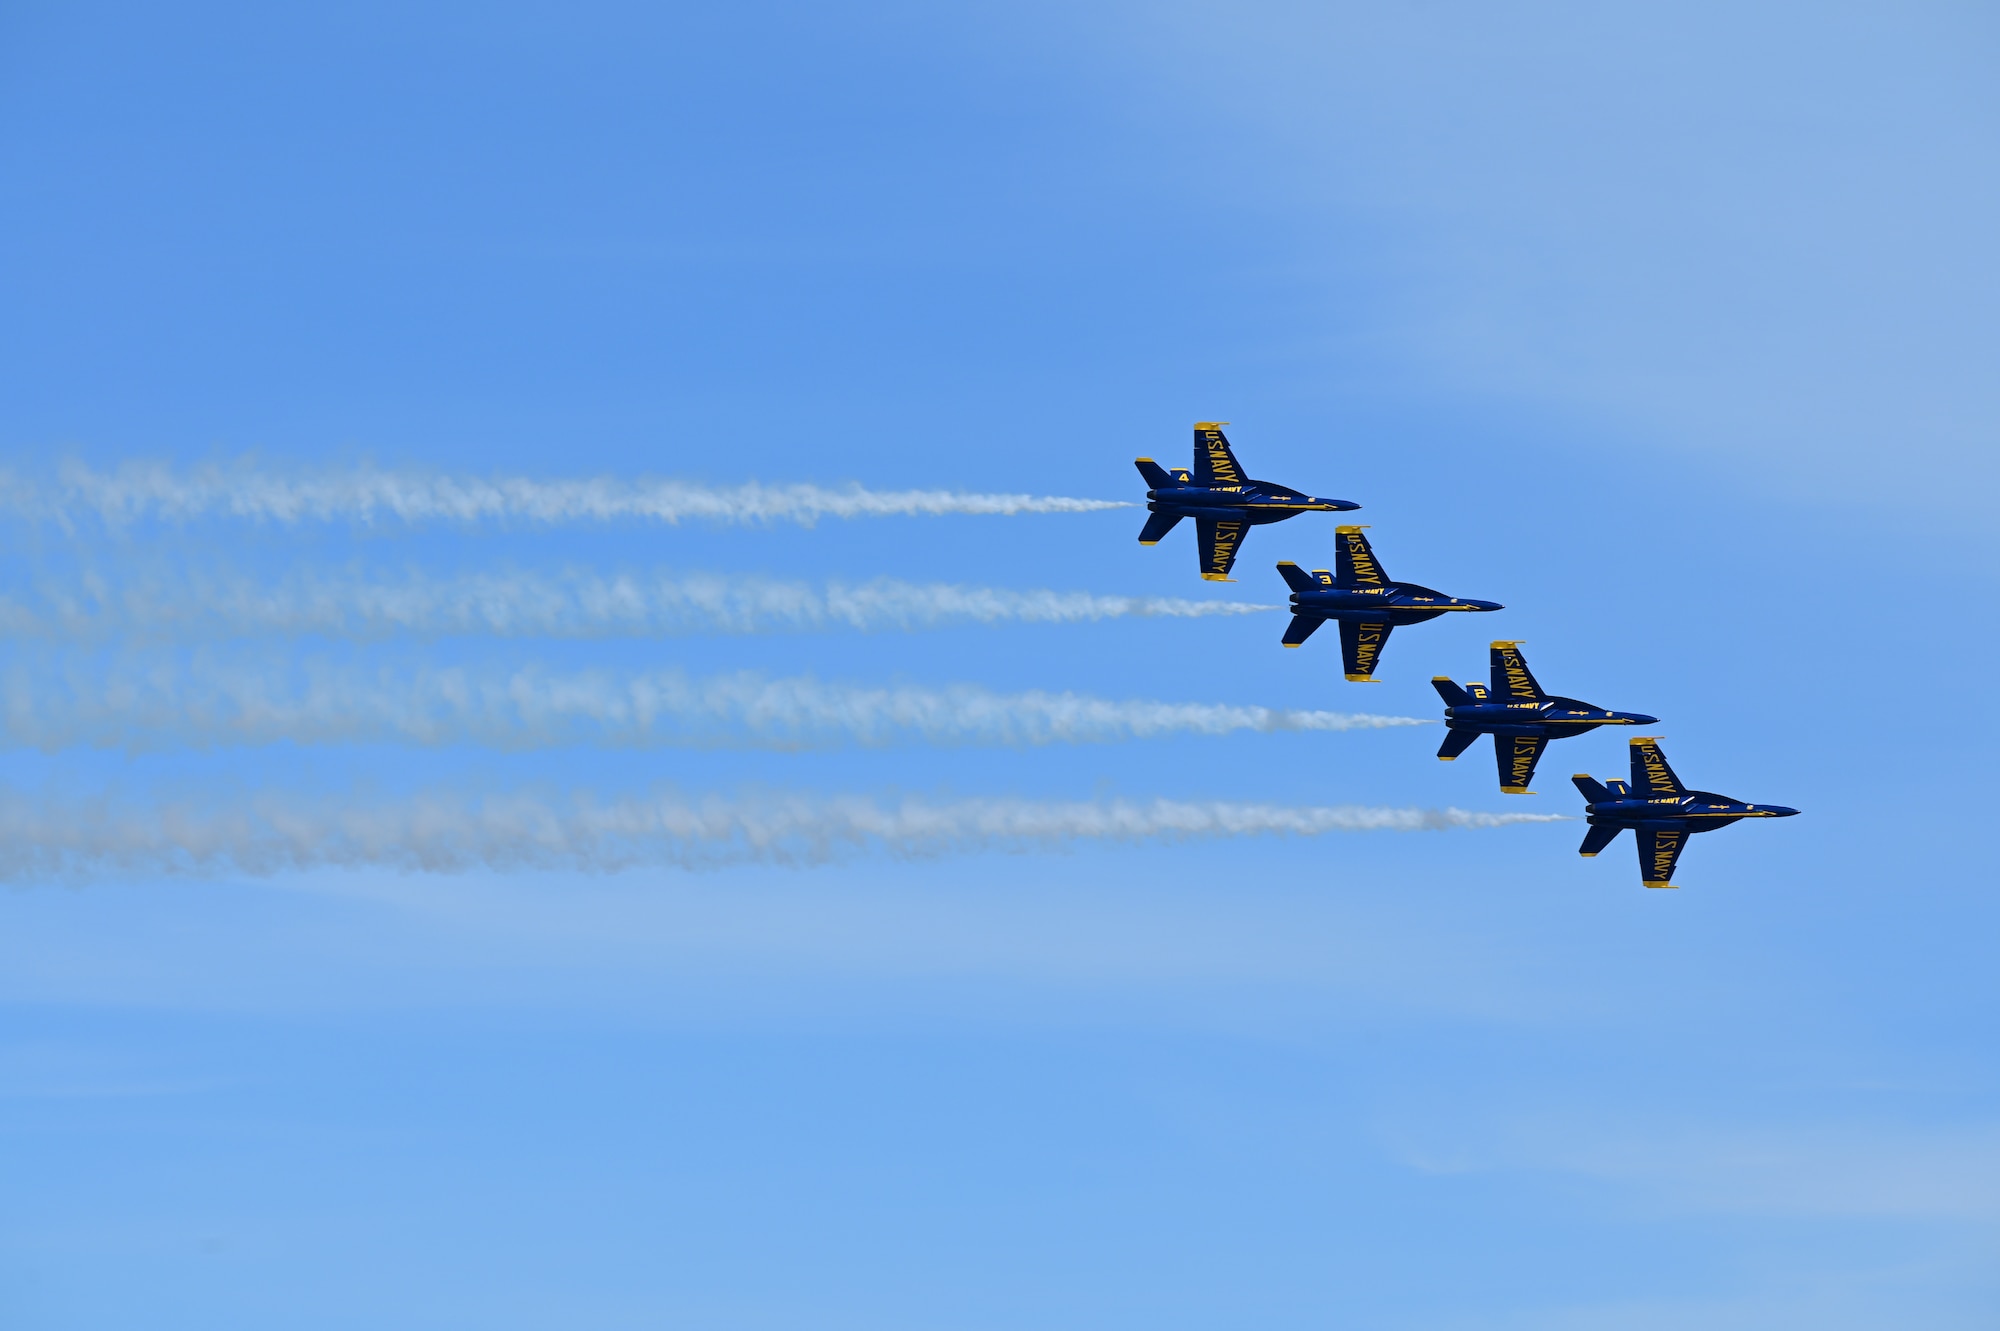 The U.S. Navy Flight Demonstration Squadron, the Blue Angels, perform during the 2022 Ellsworth Air and Space Show at Ellsworth Air Force Base, S.D., May 14, 2022. Their mission is to showcase the teamwork and professionalism of the United States Navy and Marine Corps. (U.S. Air Force photo by Staff Sgt. Hannah Malone)